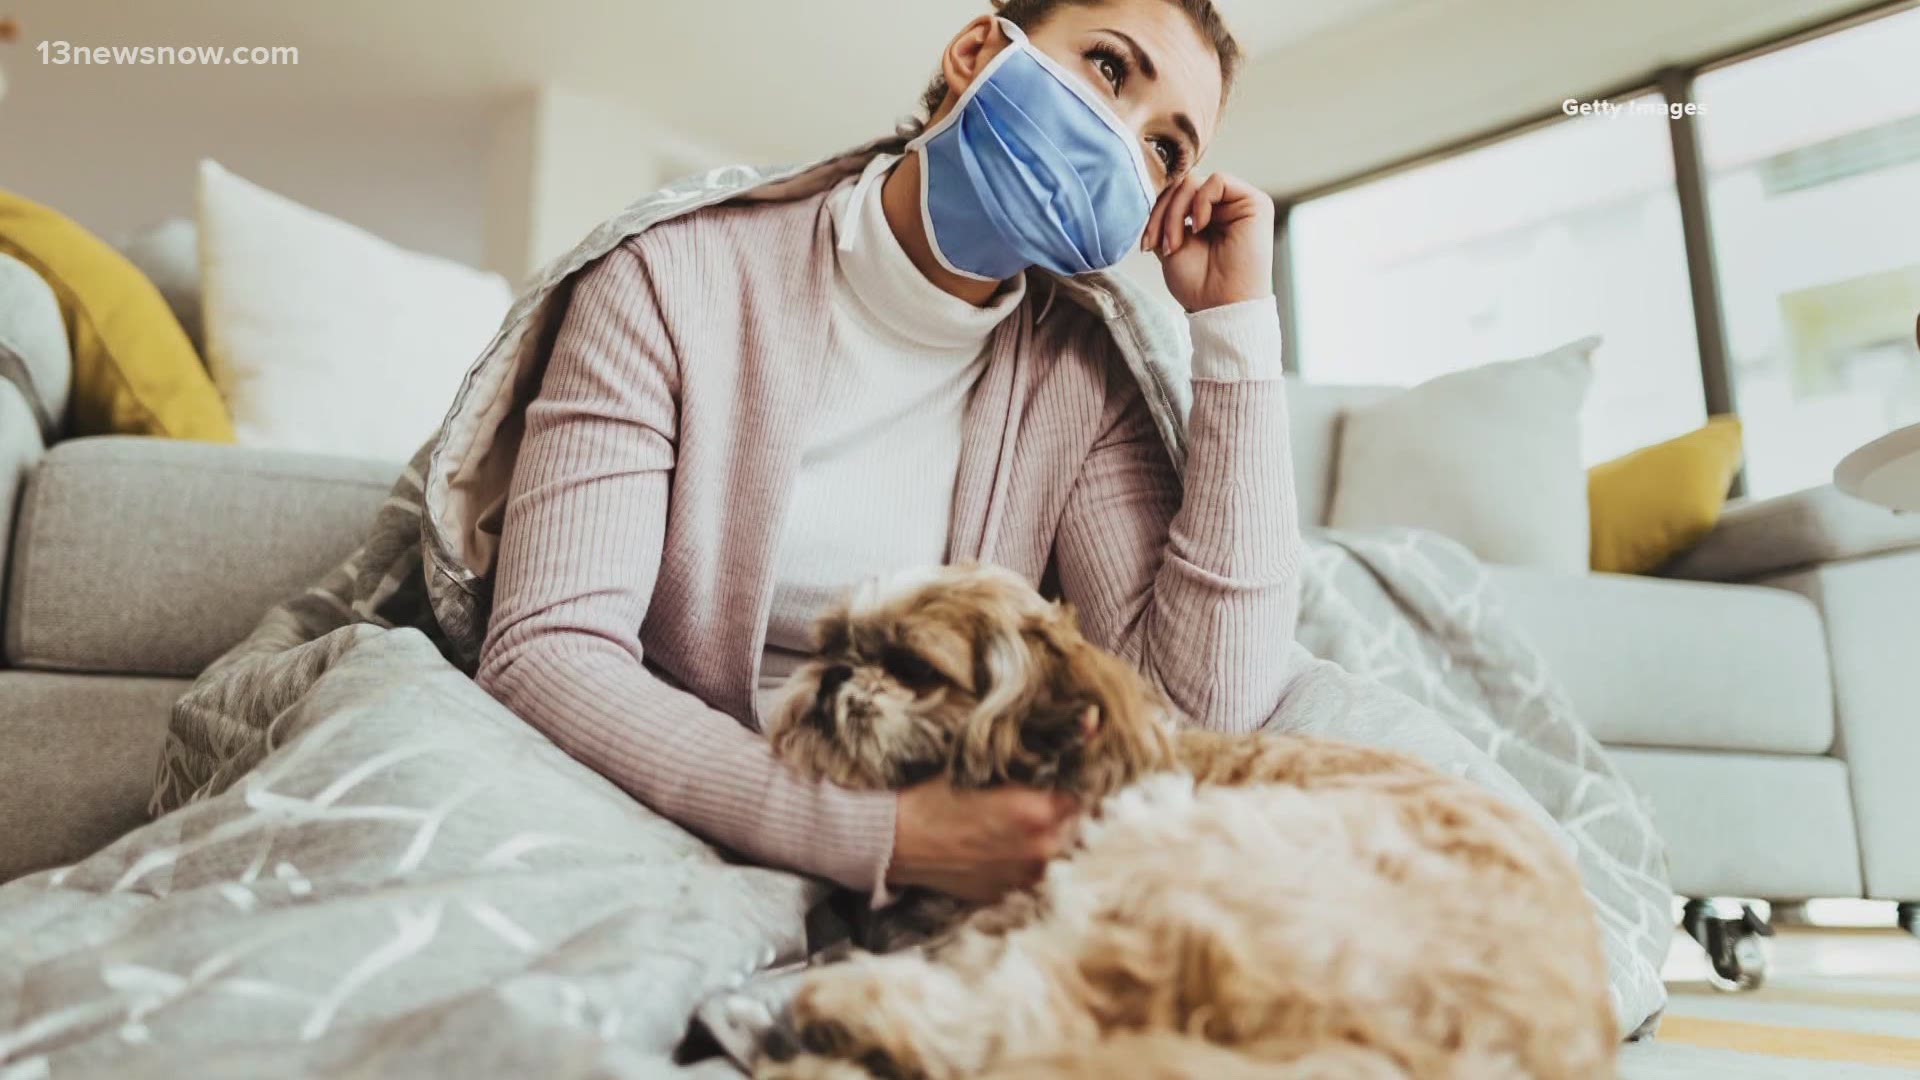 Pets can be affected by the mental state of the people around them. With coronavirus stressing pet owners, it's important to know the signs of anxiety in dogs.